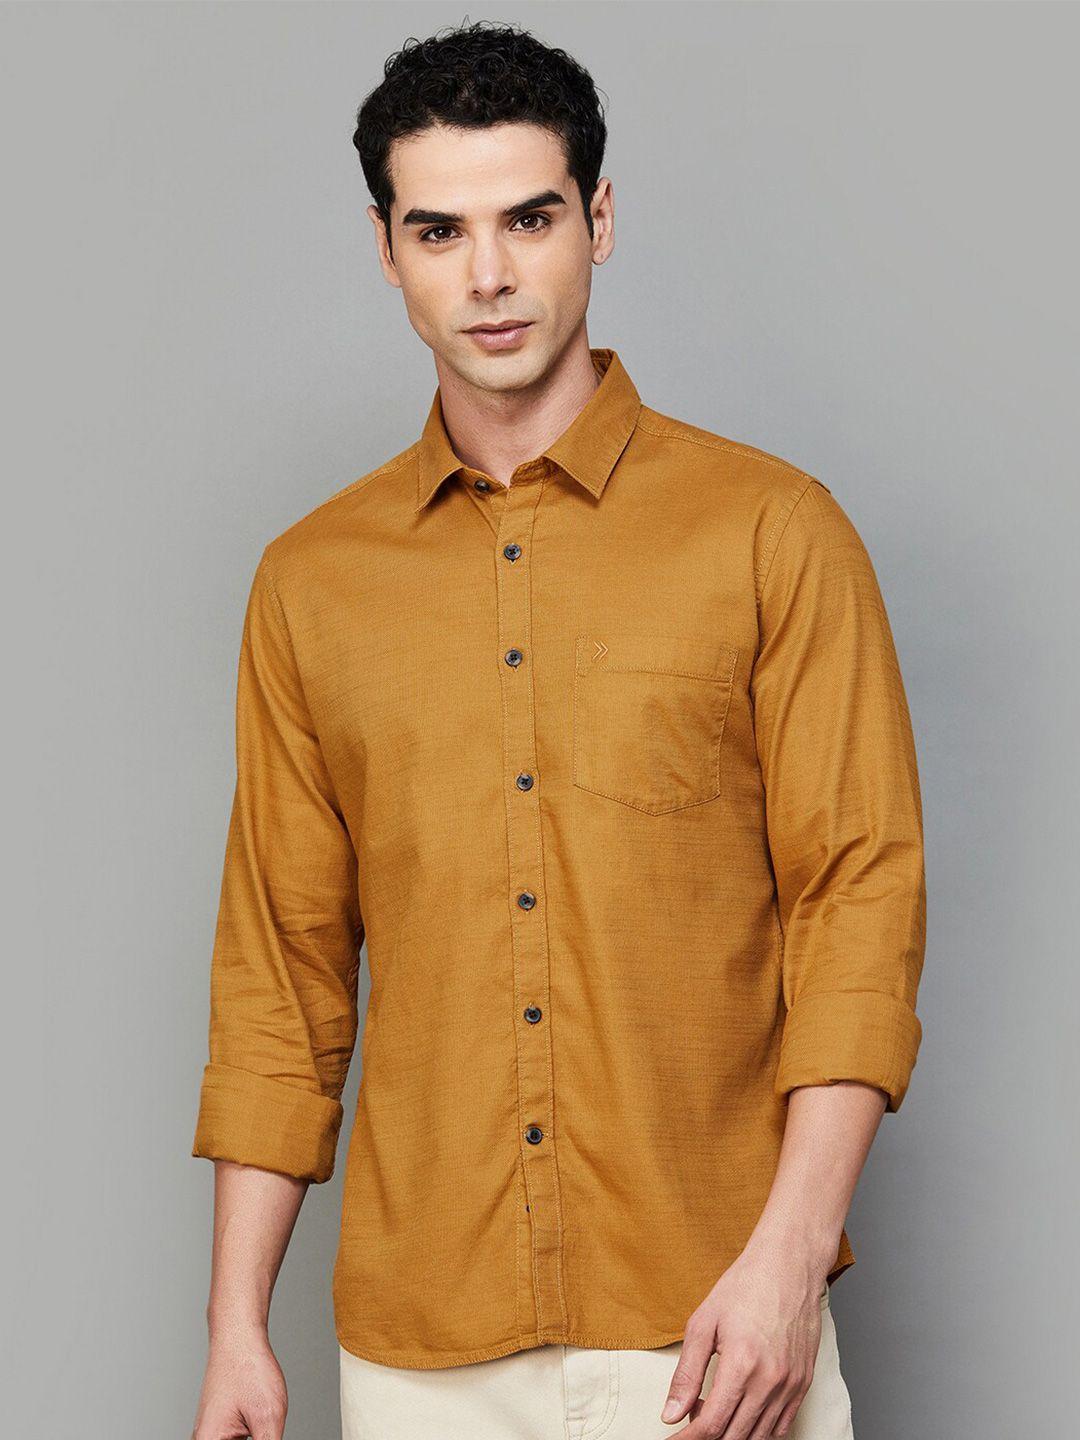 code by lifestyle cotton slim fit spread collar curved casual shirt